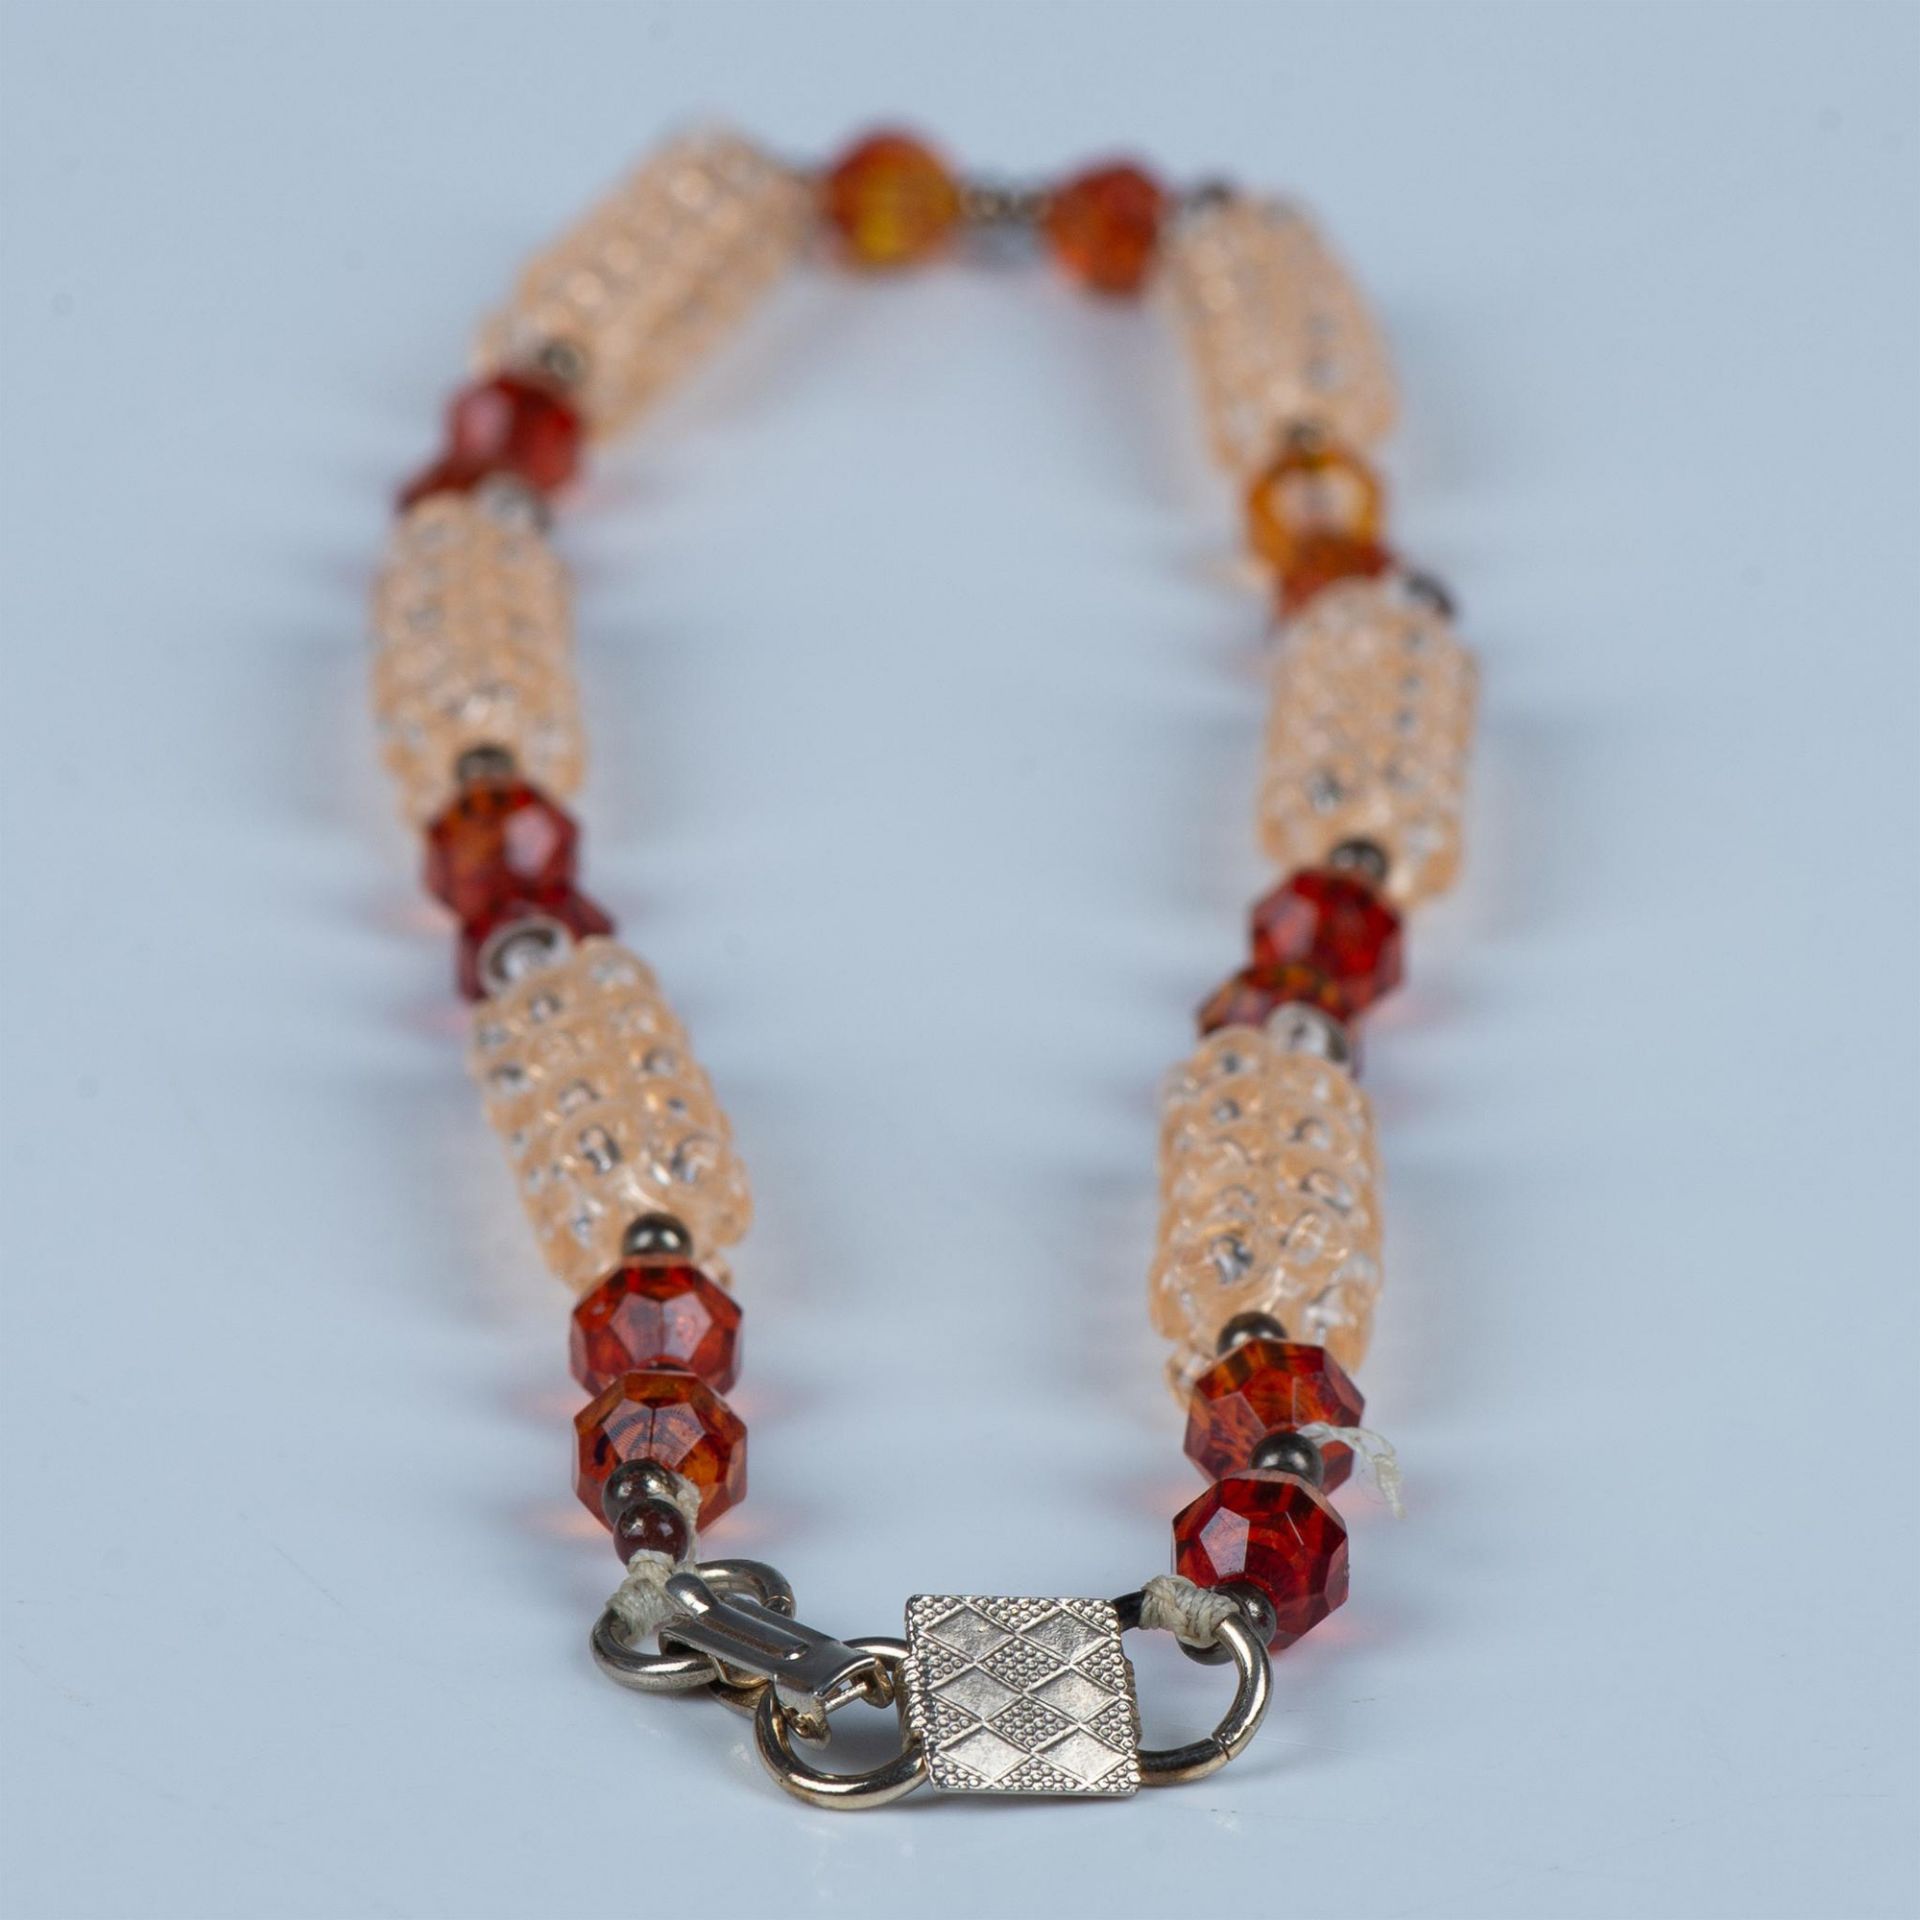 Cute Peach and Amber Colored Bead Necklace - Image 3 of 3